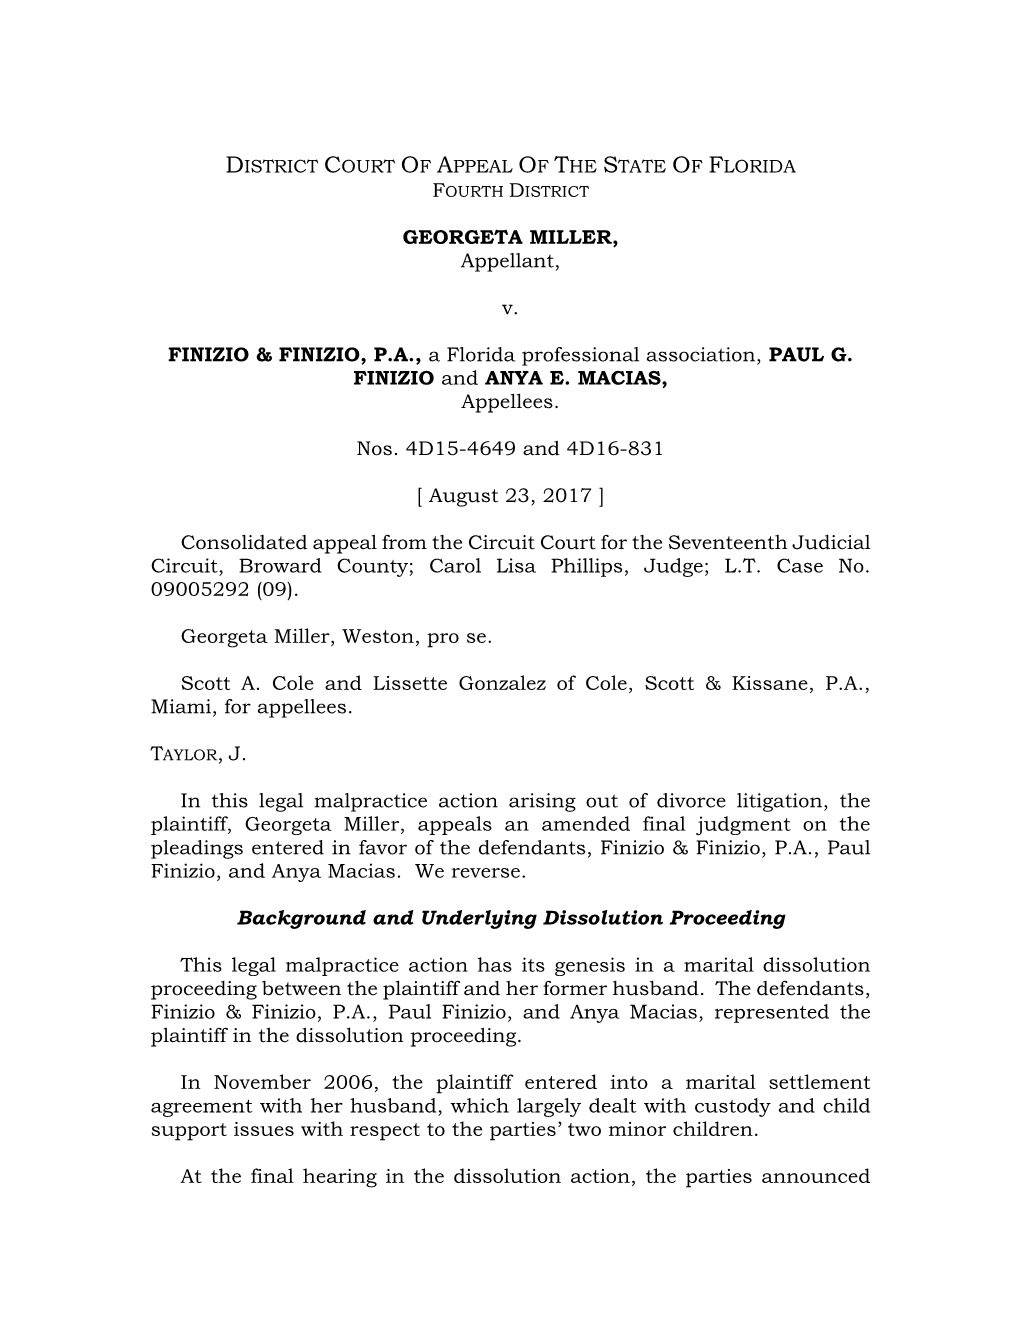 District Court of Appeal of the State of Florida Fourth District